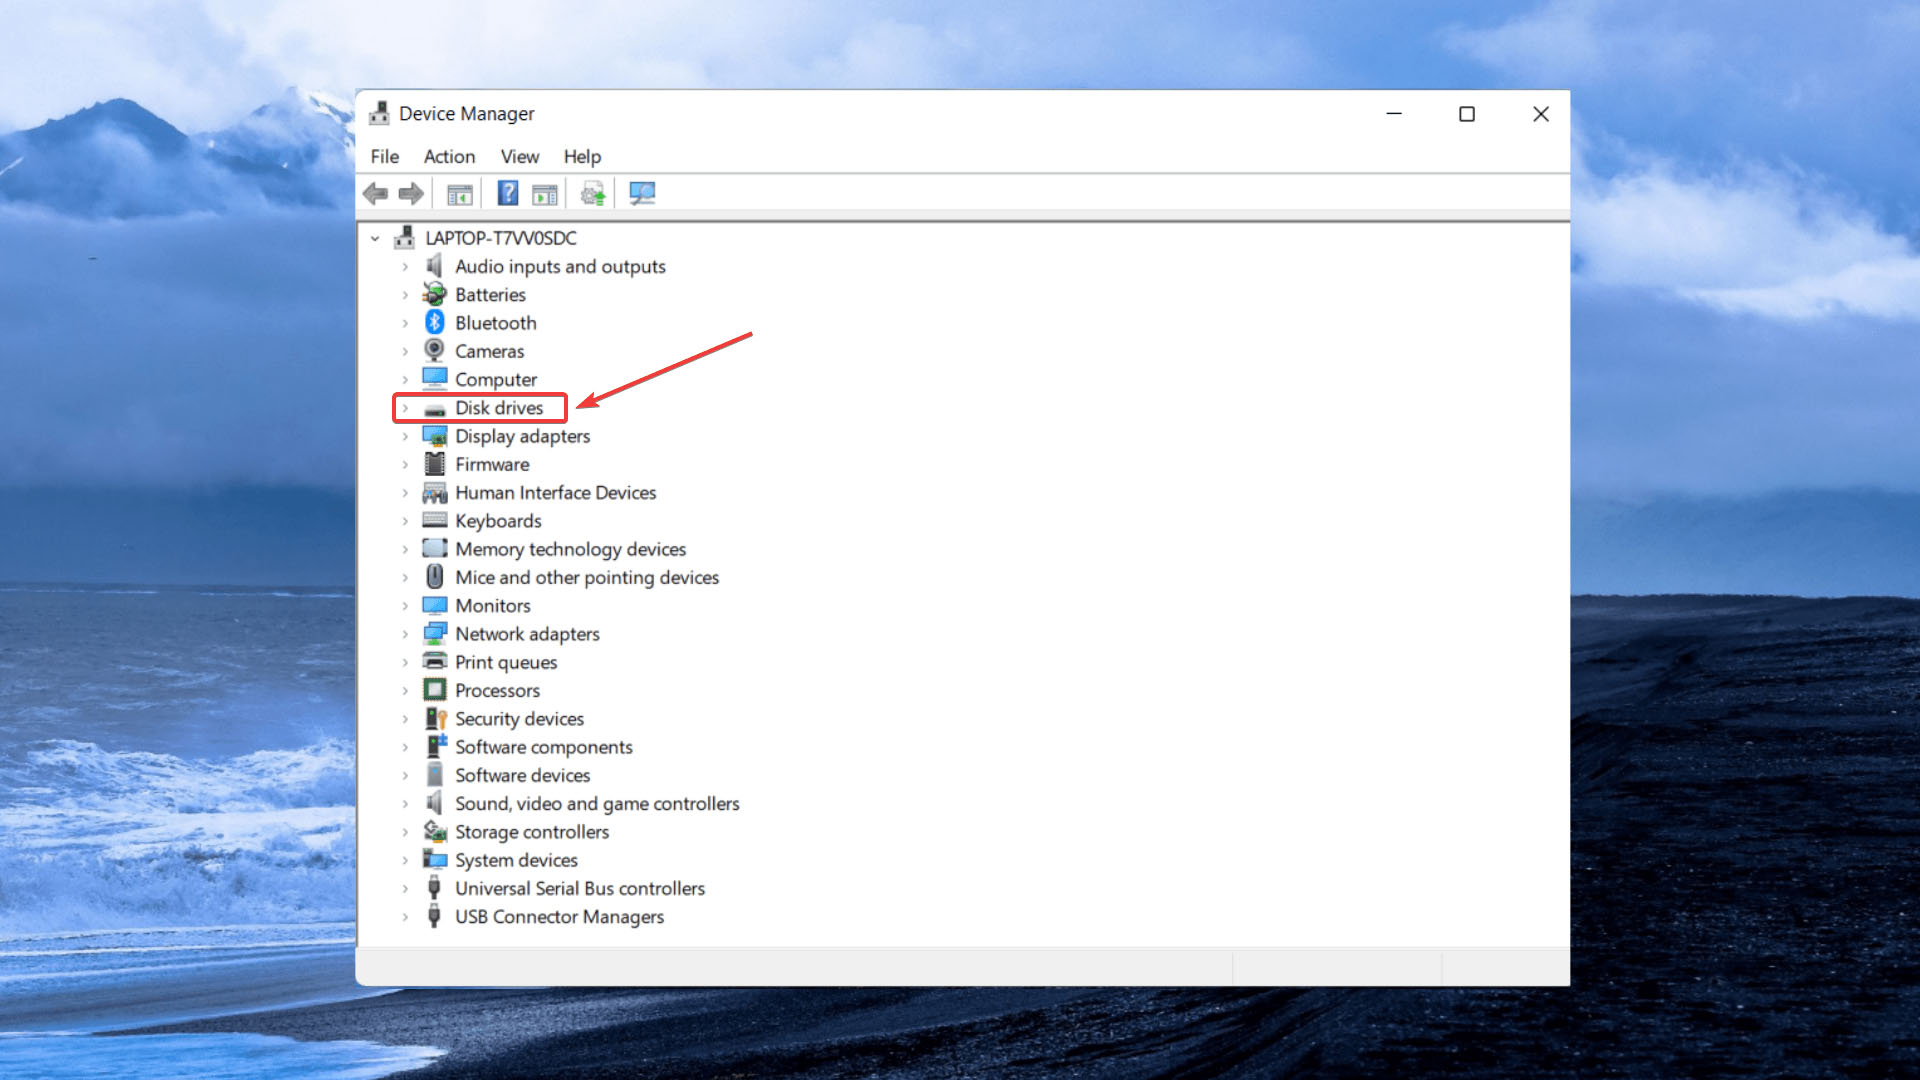 accessing disk drives from device manager